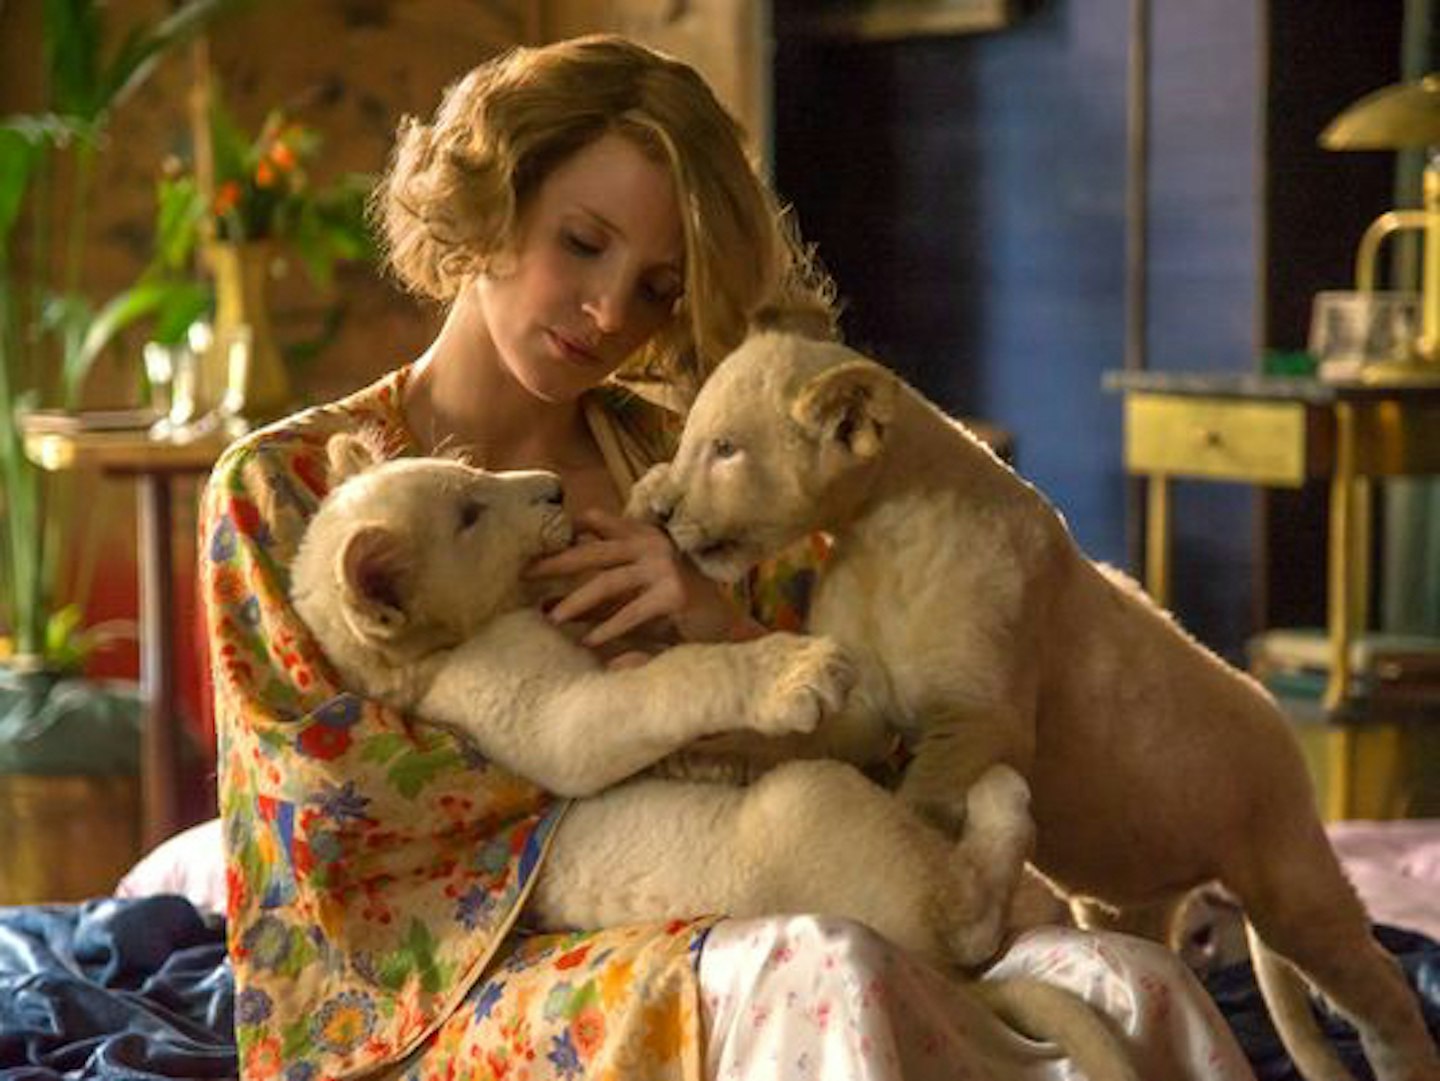 Jessica Chastain in The Zookeeper's Wife